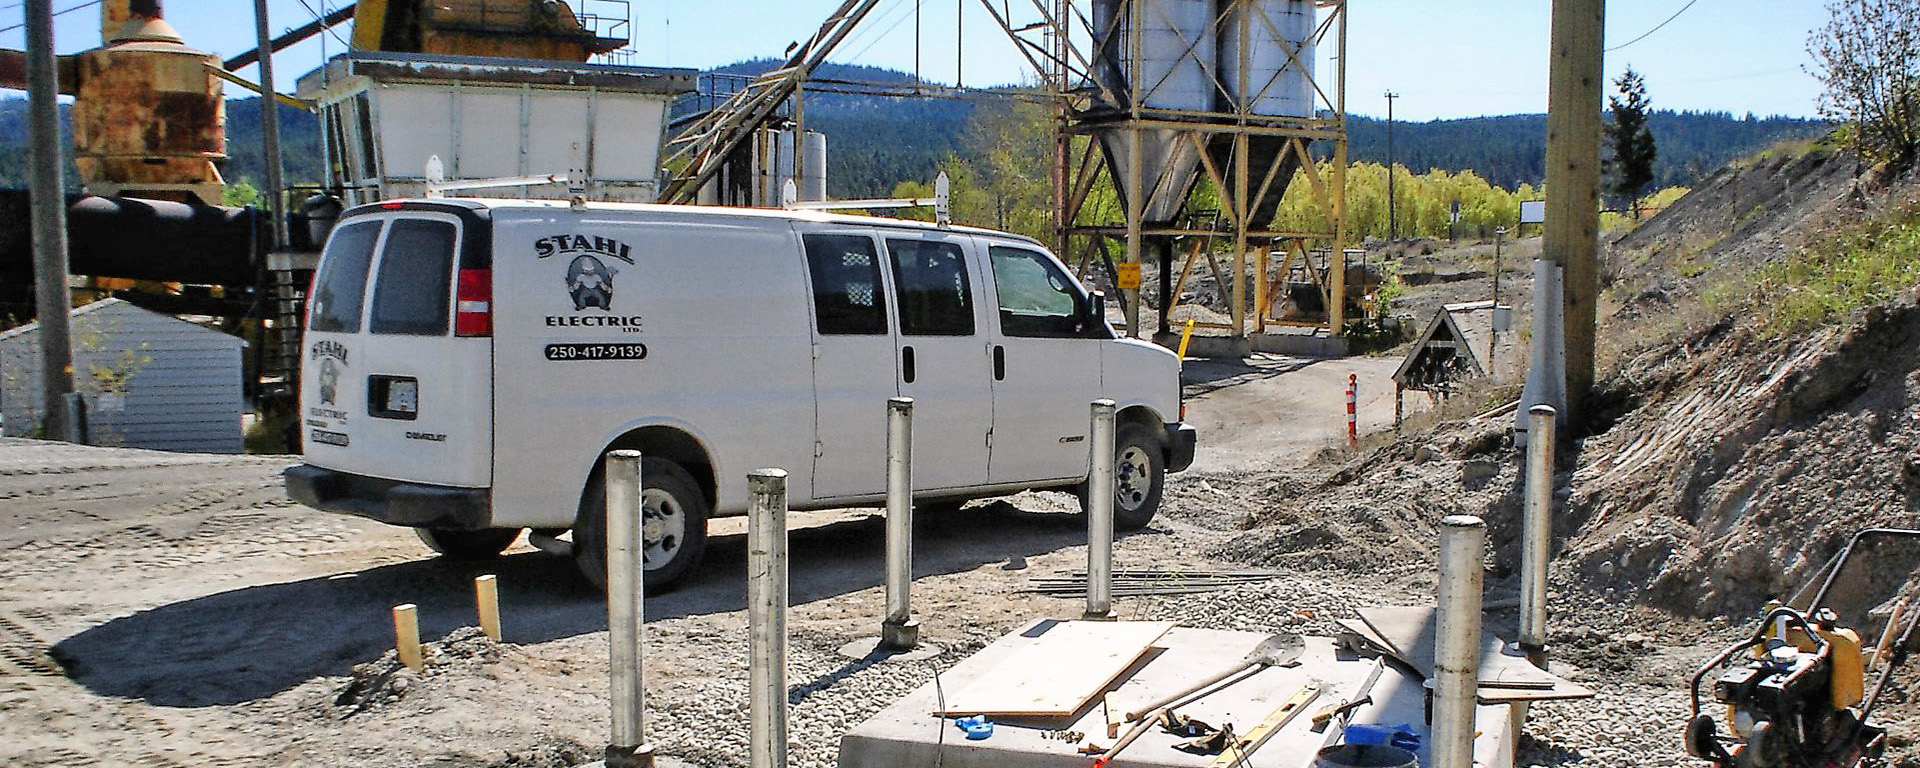 A white van with the Stahl Electric logo is parked at an industrial jobsite. 